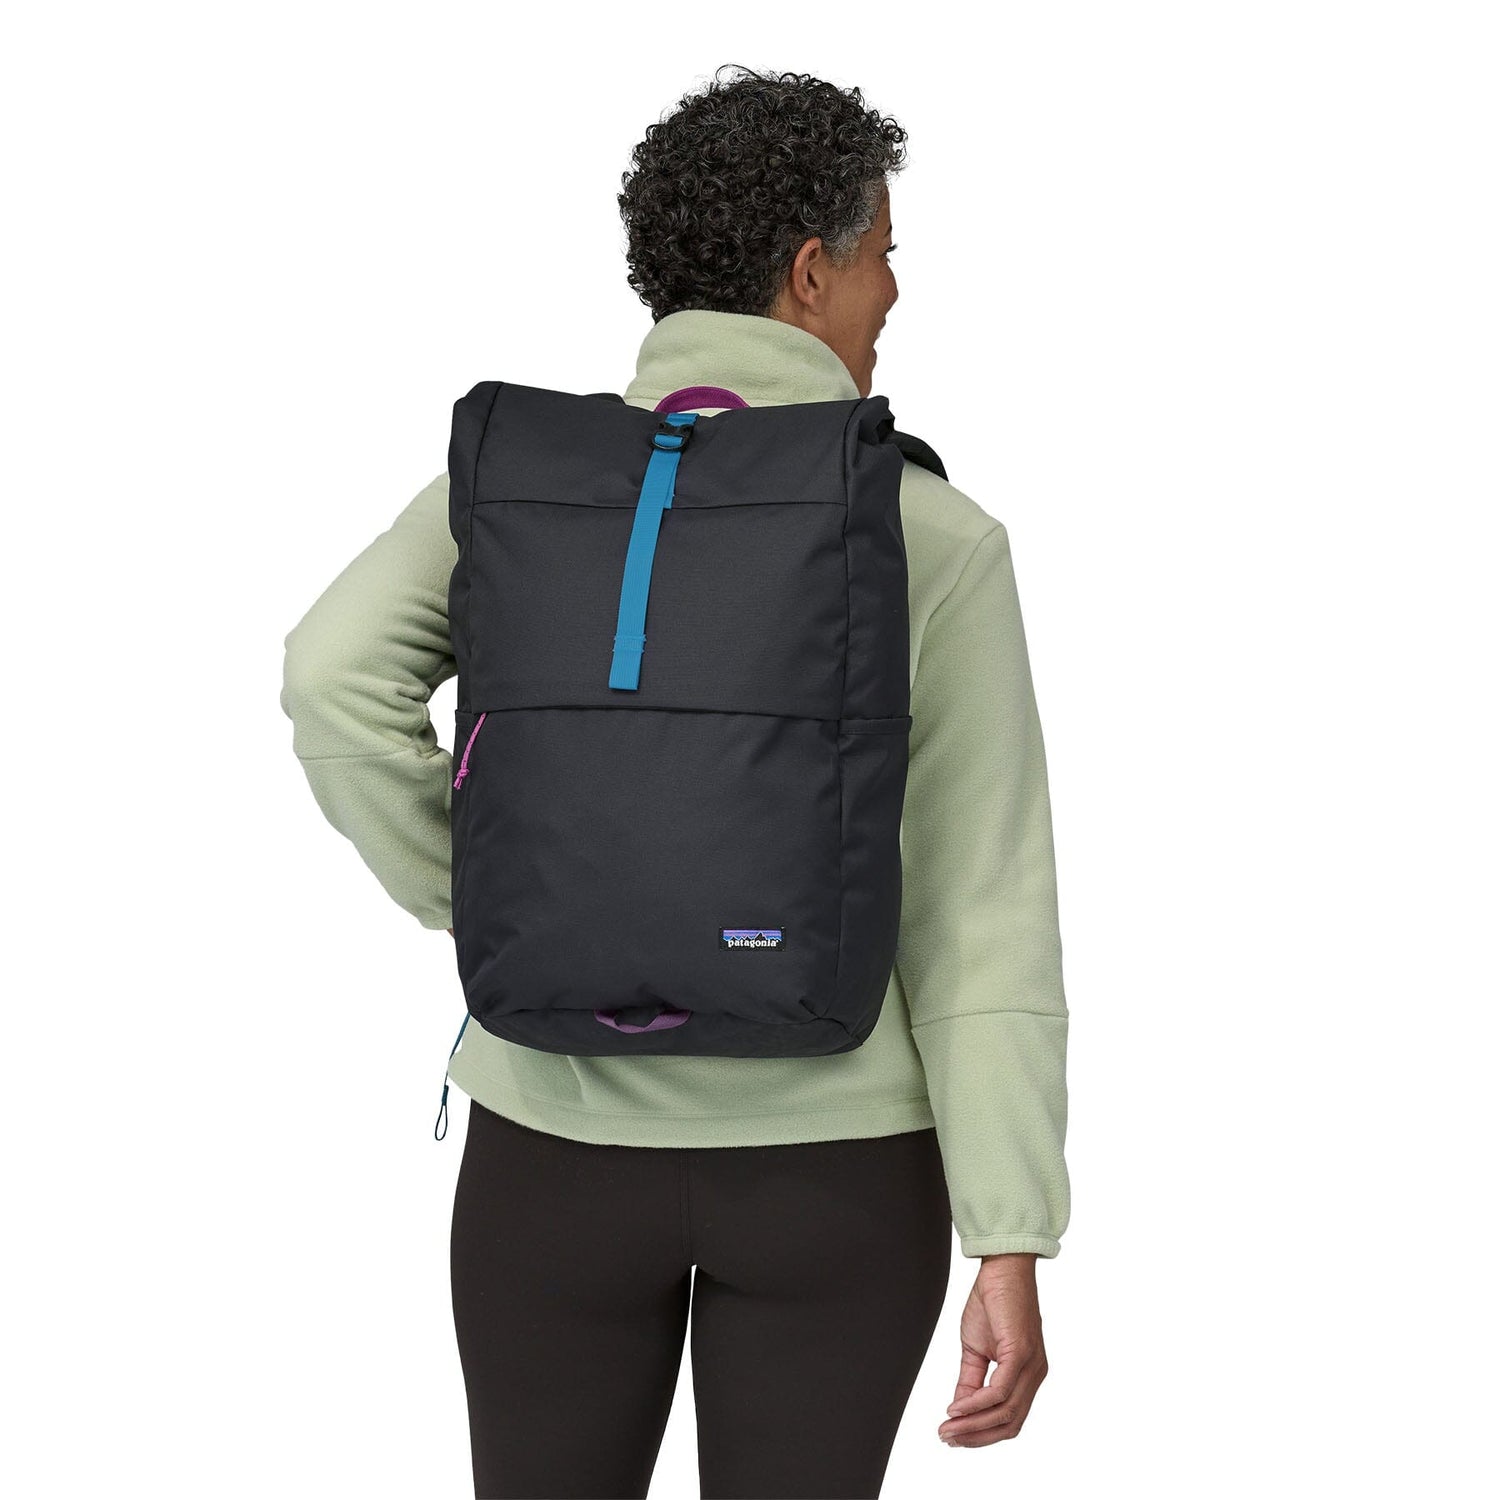 Patagonia Fieldsmith Roll Top Pack 30l - 100% Recycled Polyester Bags